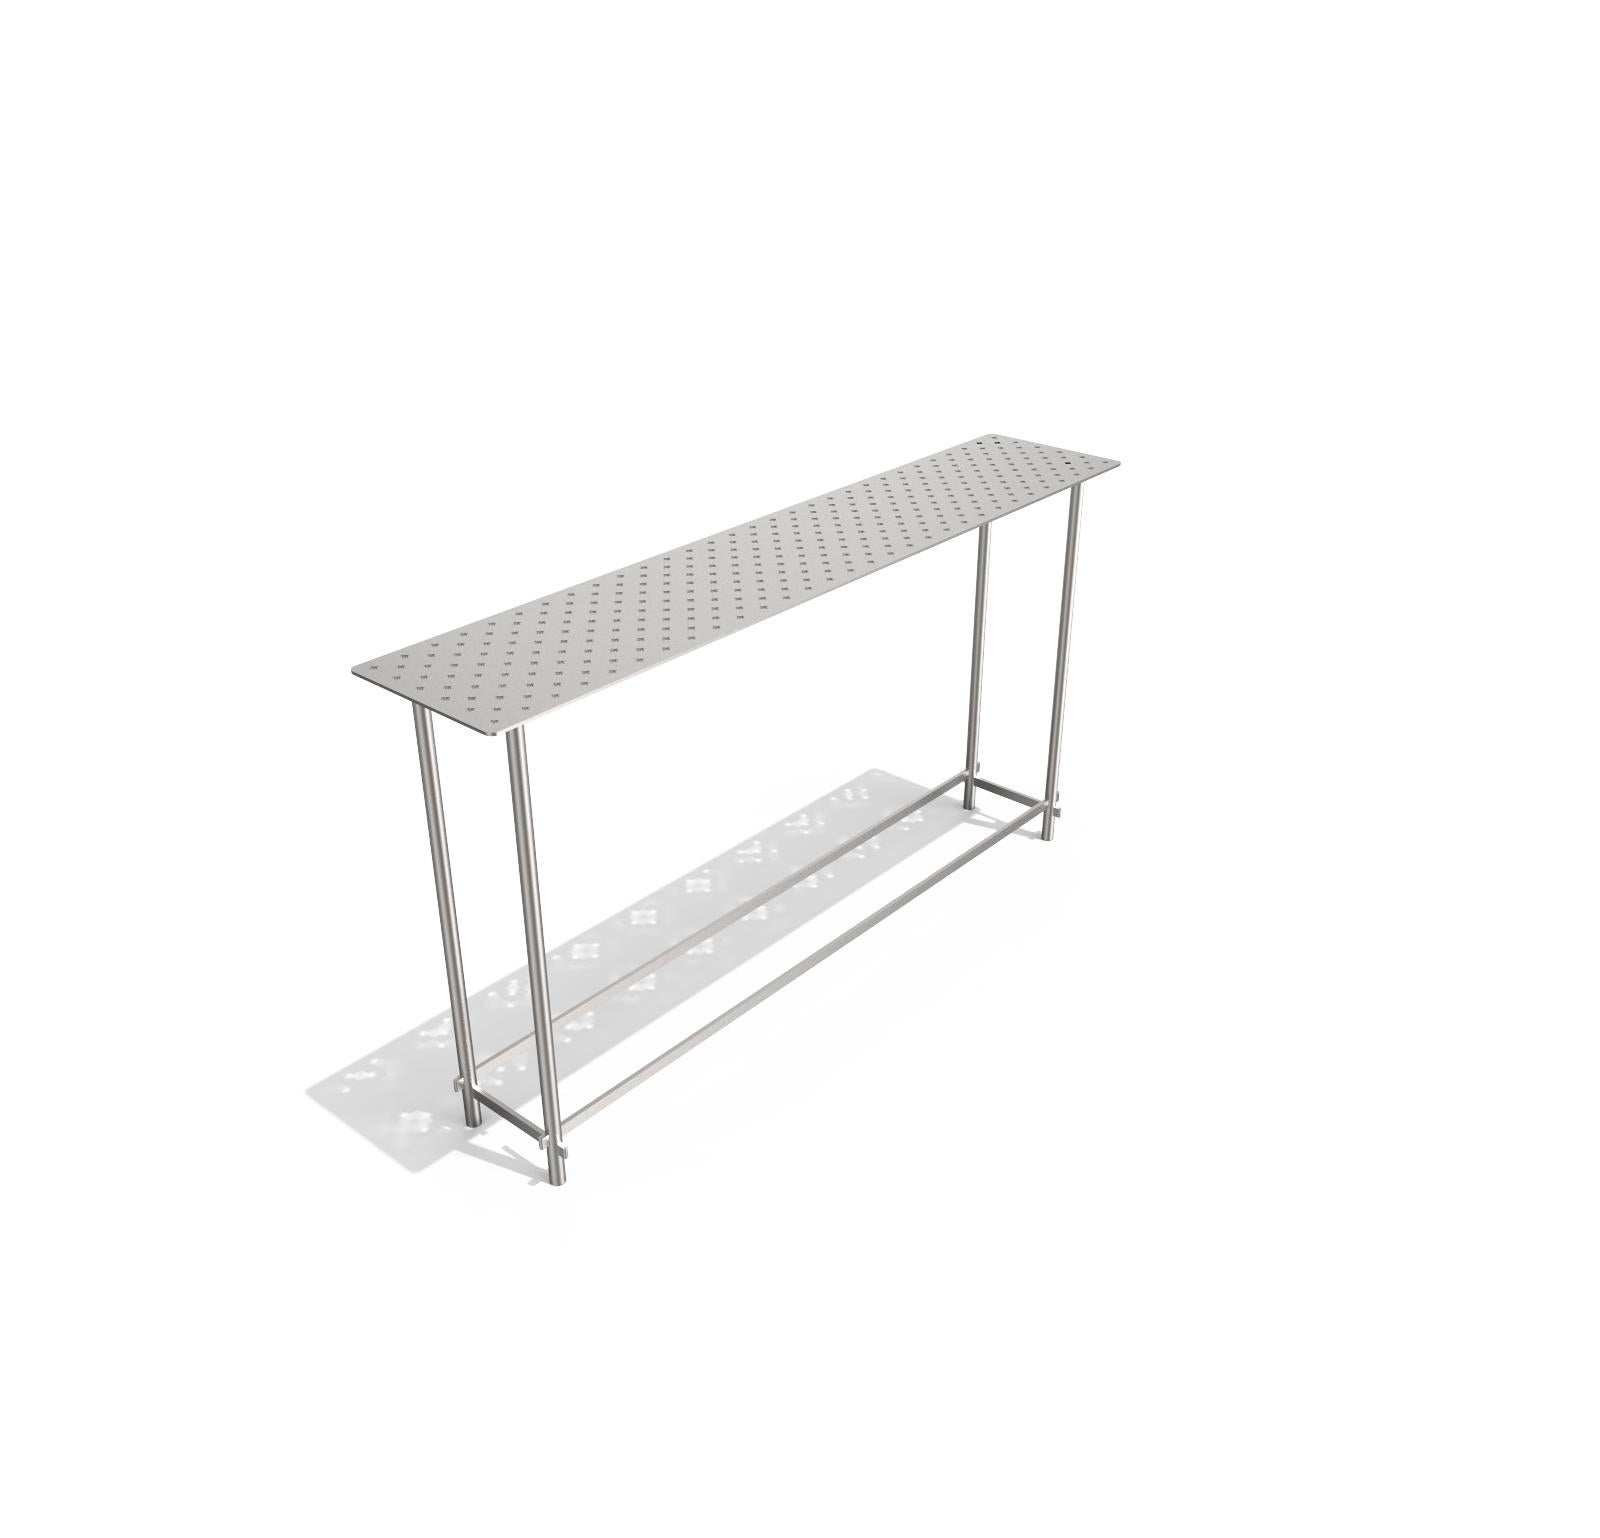 Metal console table with perforated top on a laser-cut interlocking tubular structure. Metal parts in RAL colors varnish or light brass/dark bronze/copper/dark grey satin finish.